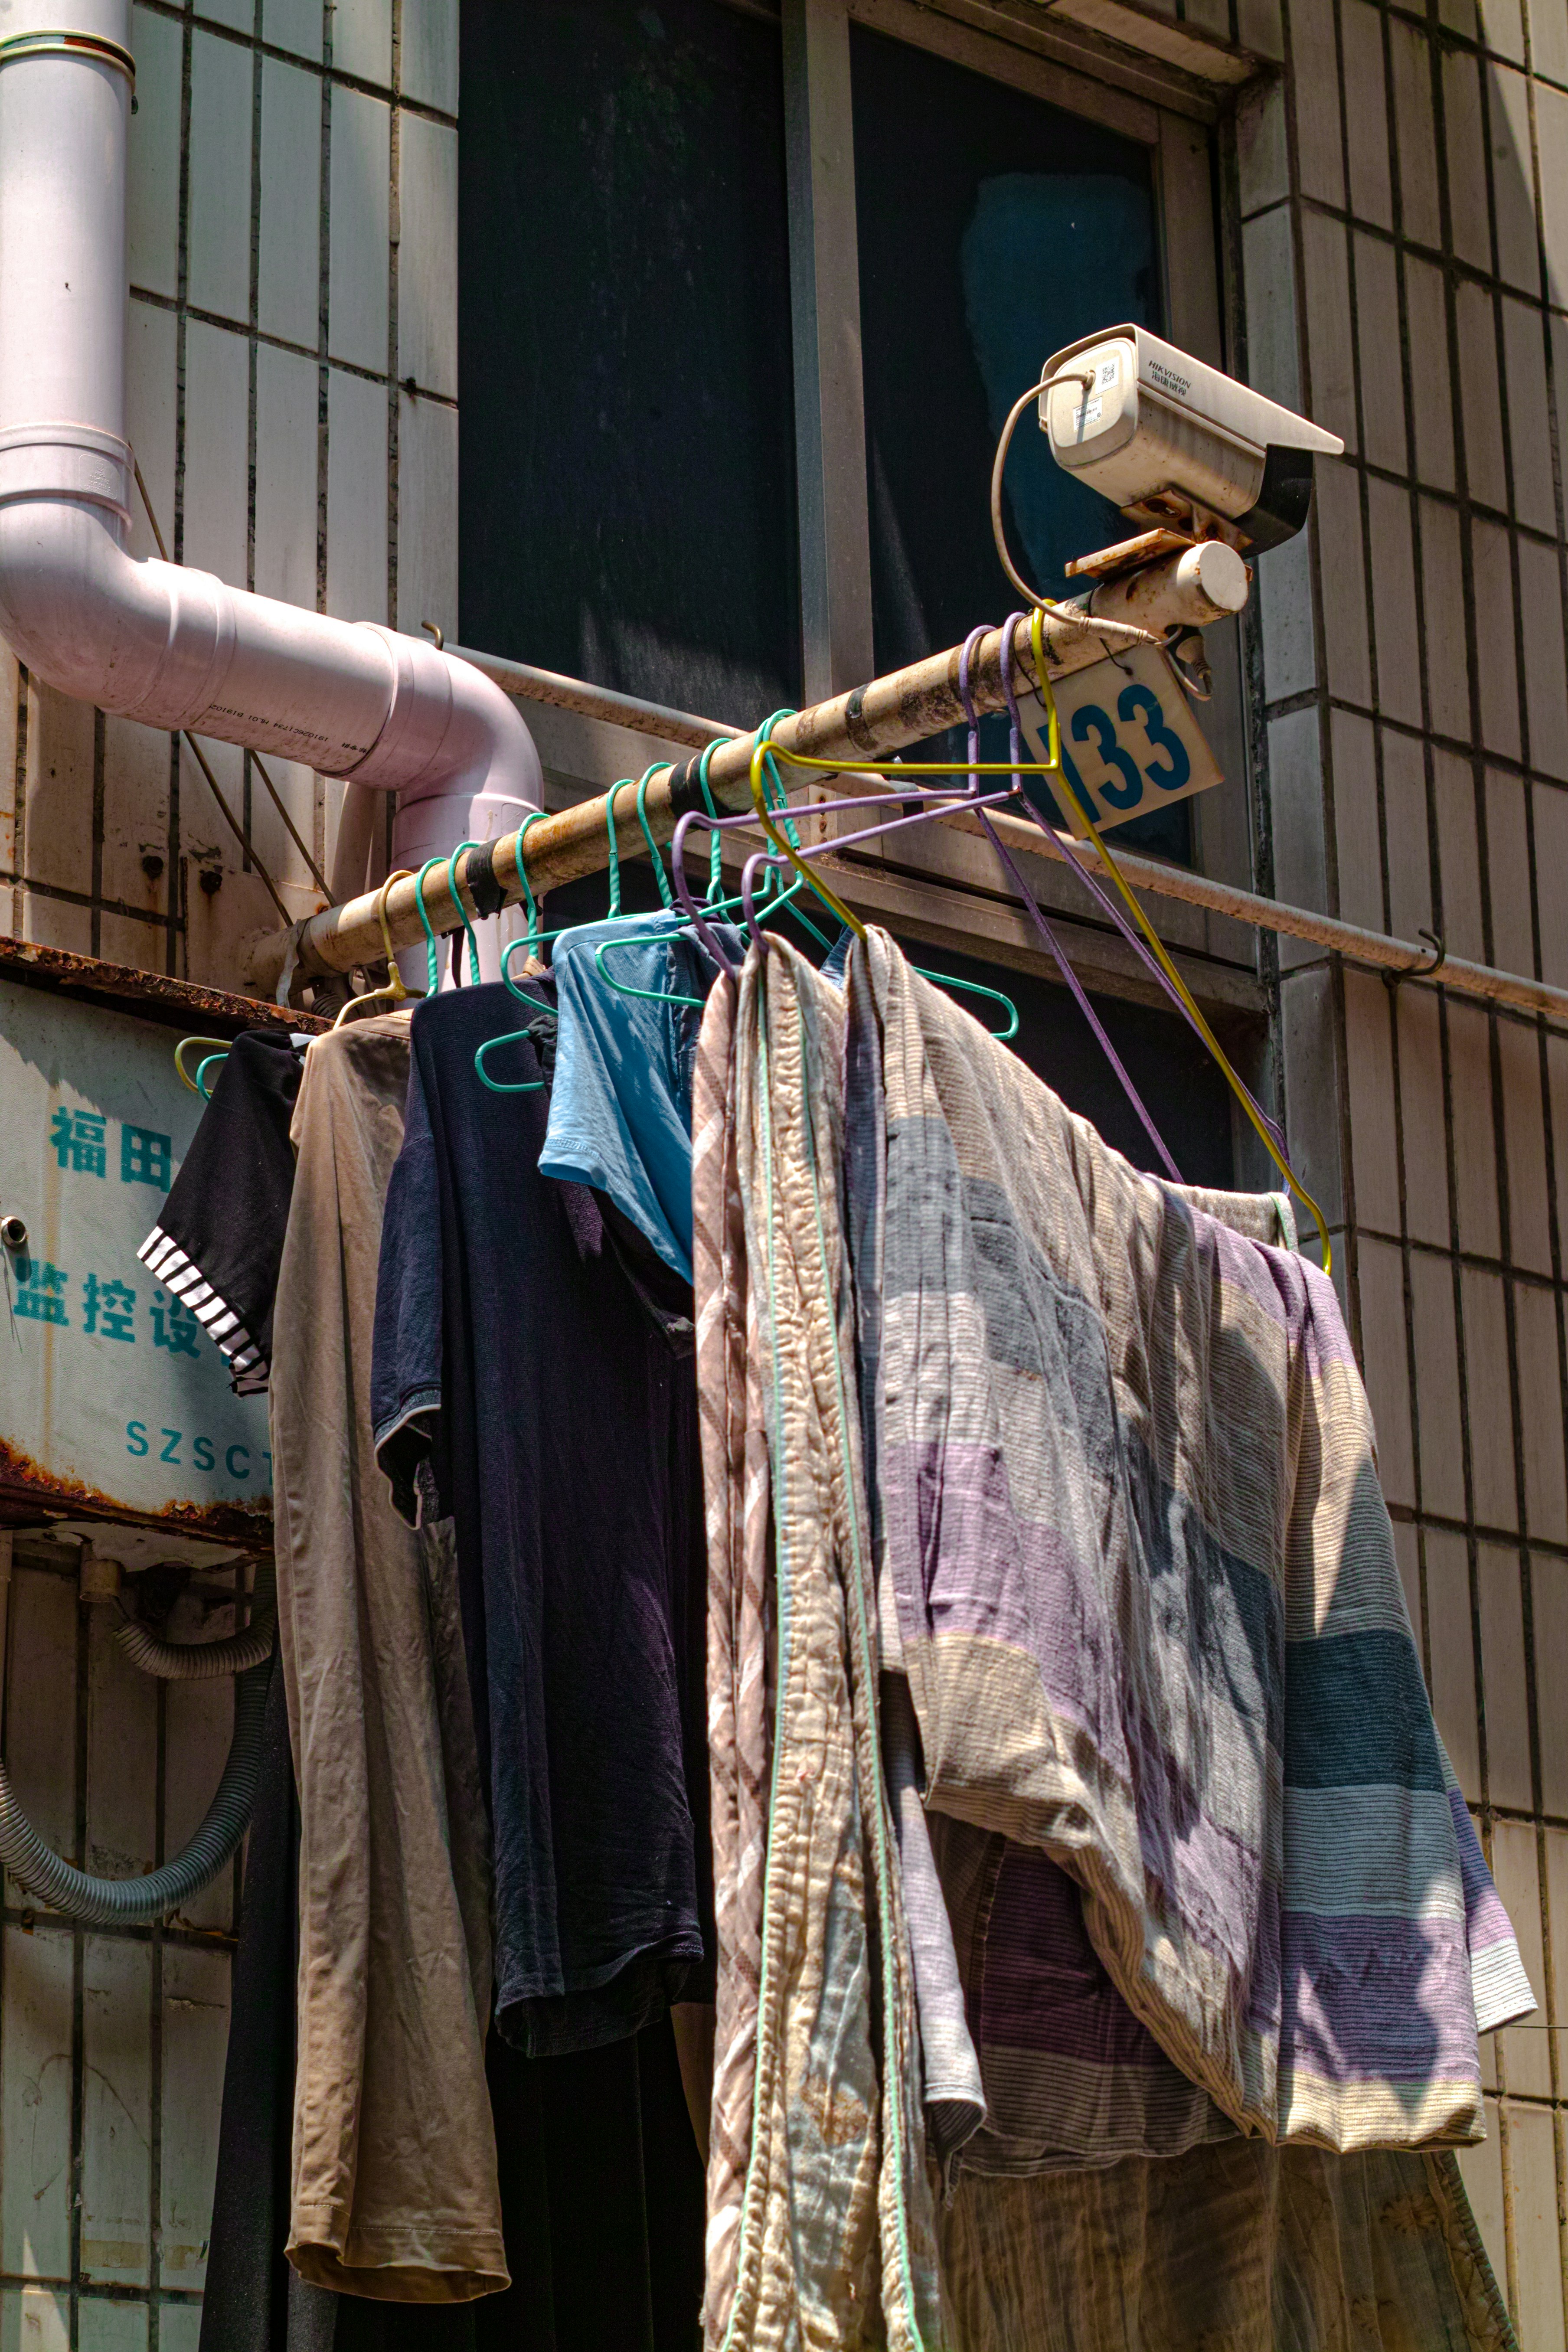 clothes hanged on clothes line